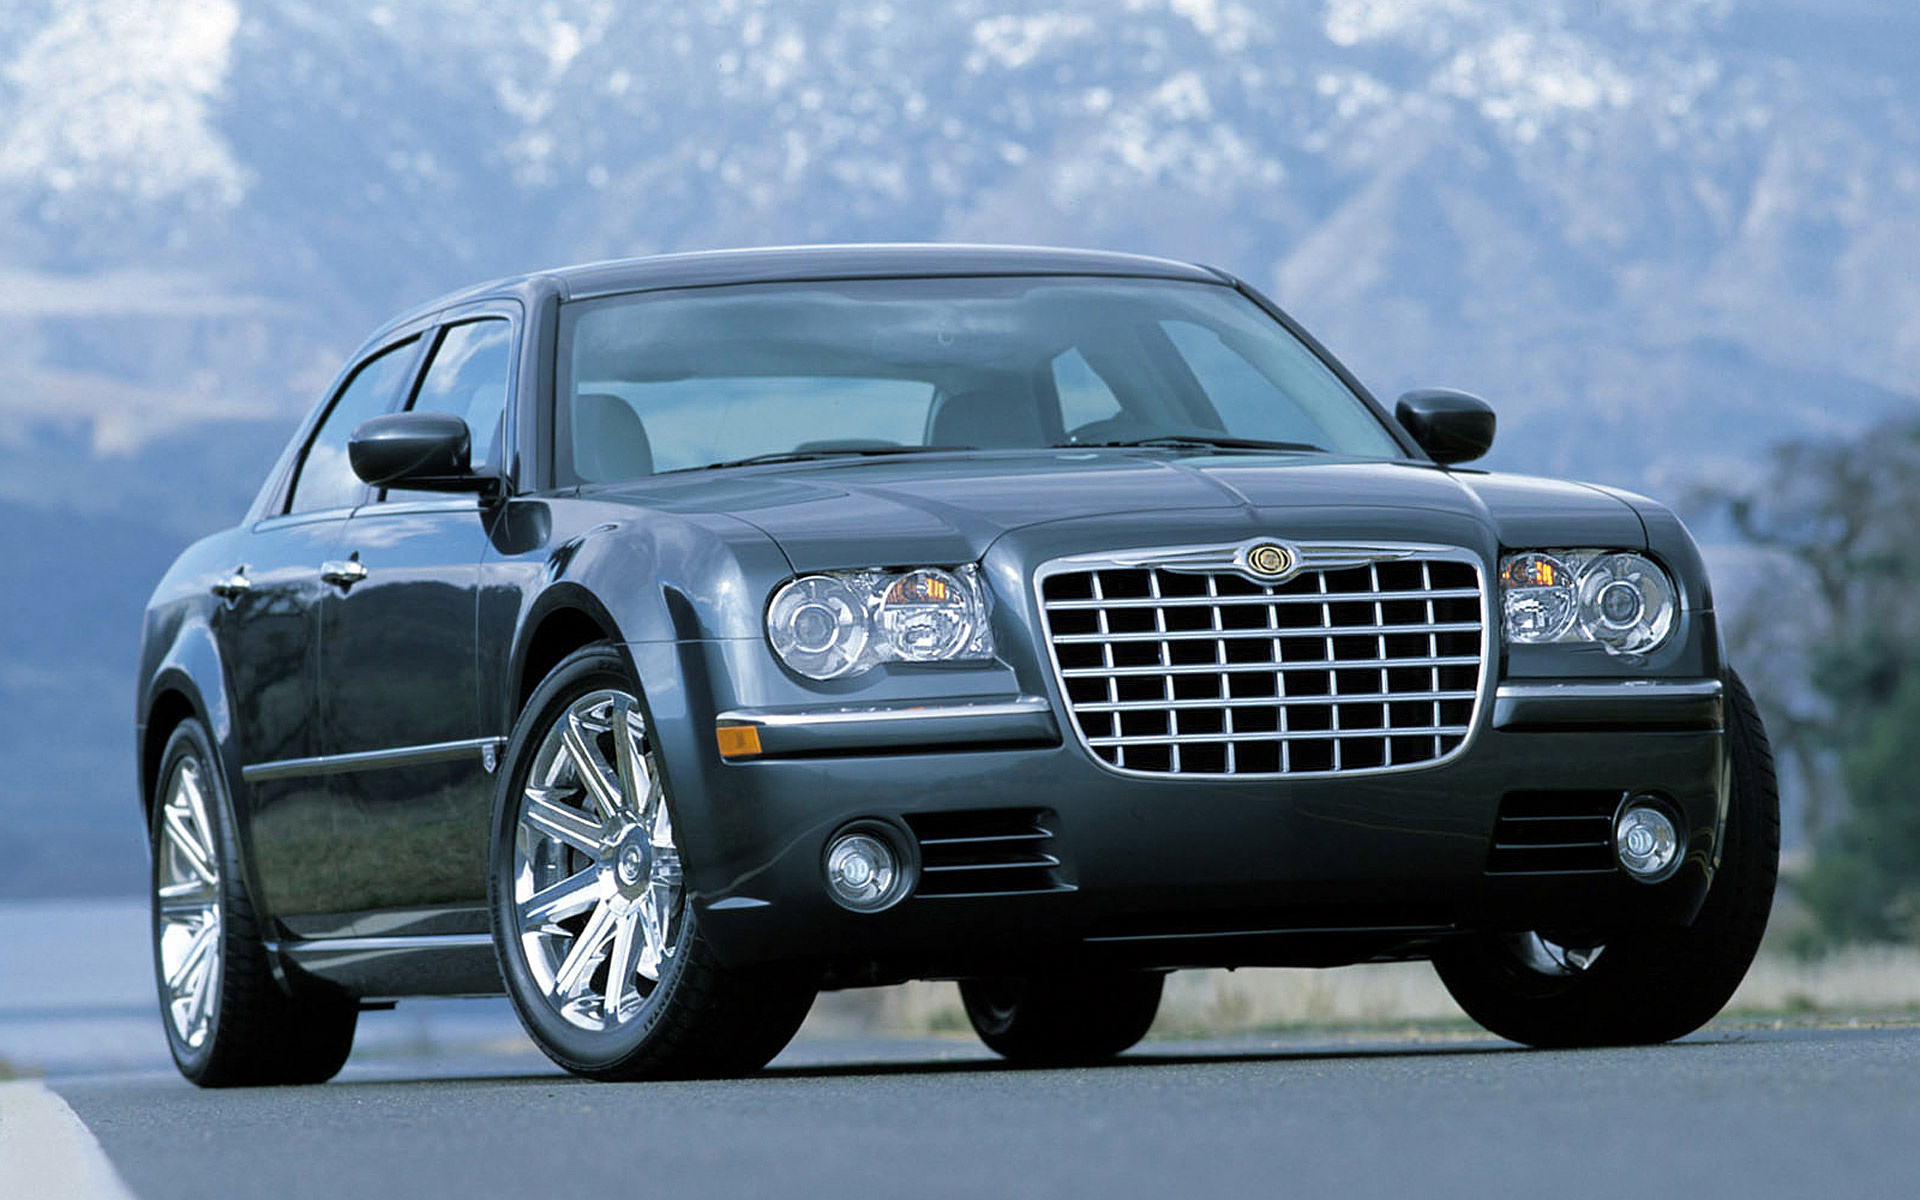 Chrysler automobiles, 2003 concept, Innovative features, Bold styling, 1920x1200 HD Desktop